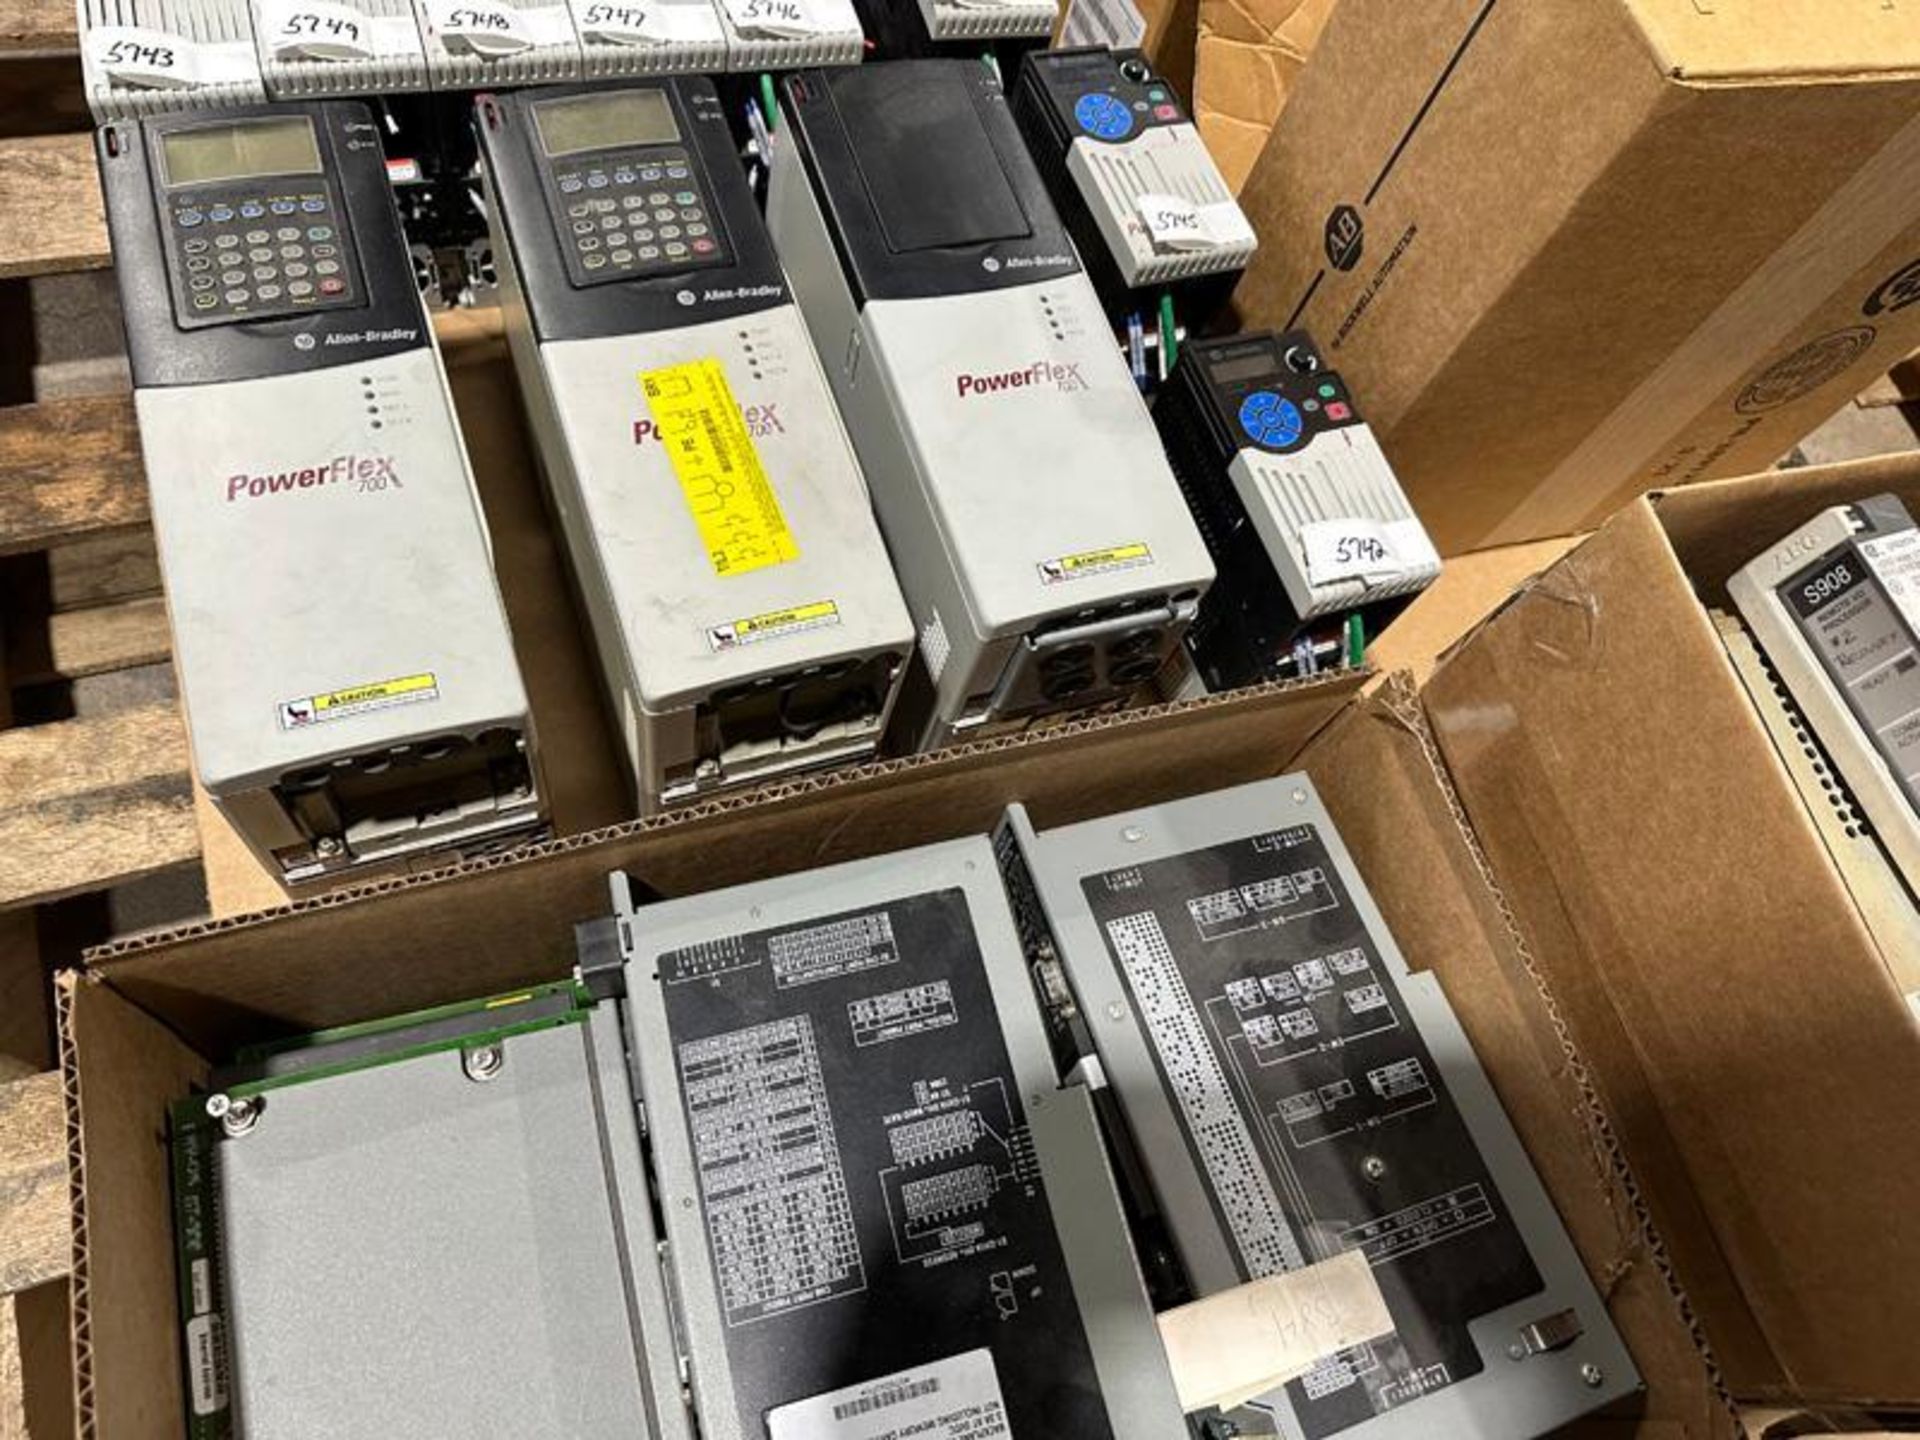 Skid Of Allen Bradley Powerflex Drives And Panelview Screens - Image 6 of 6